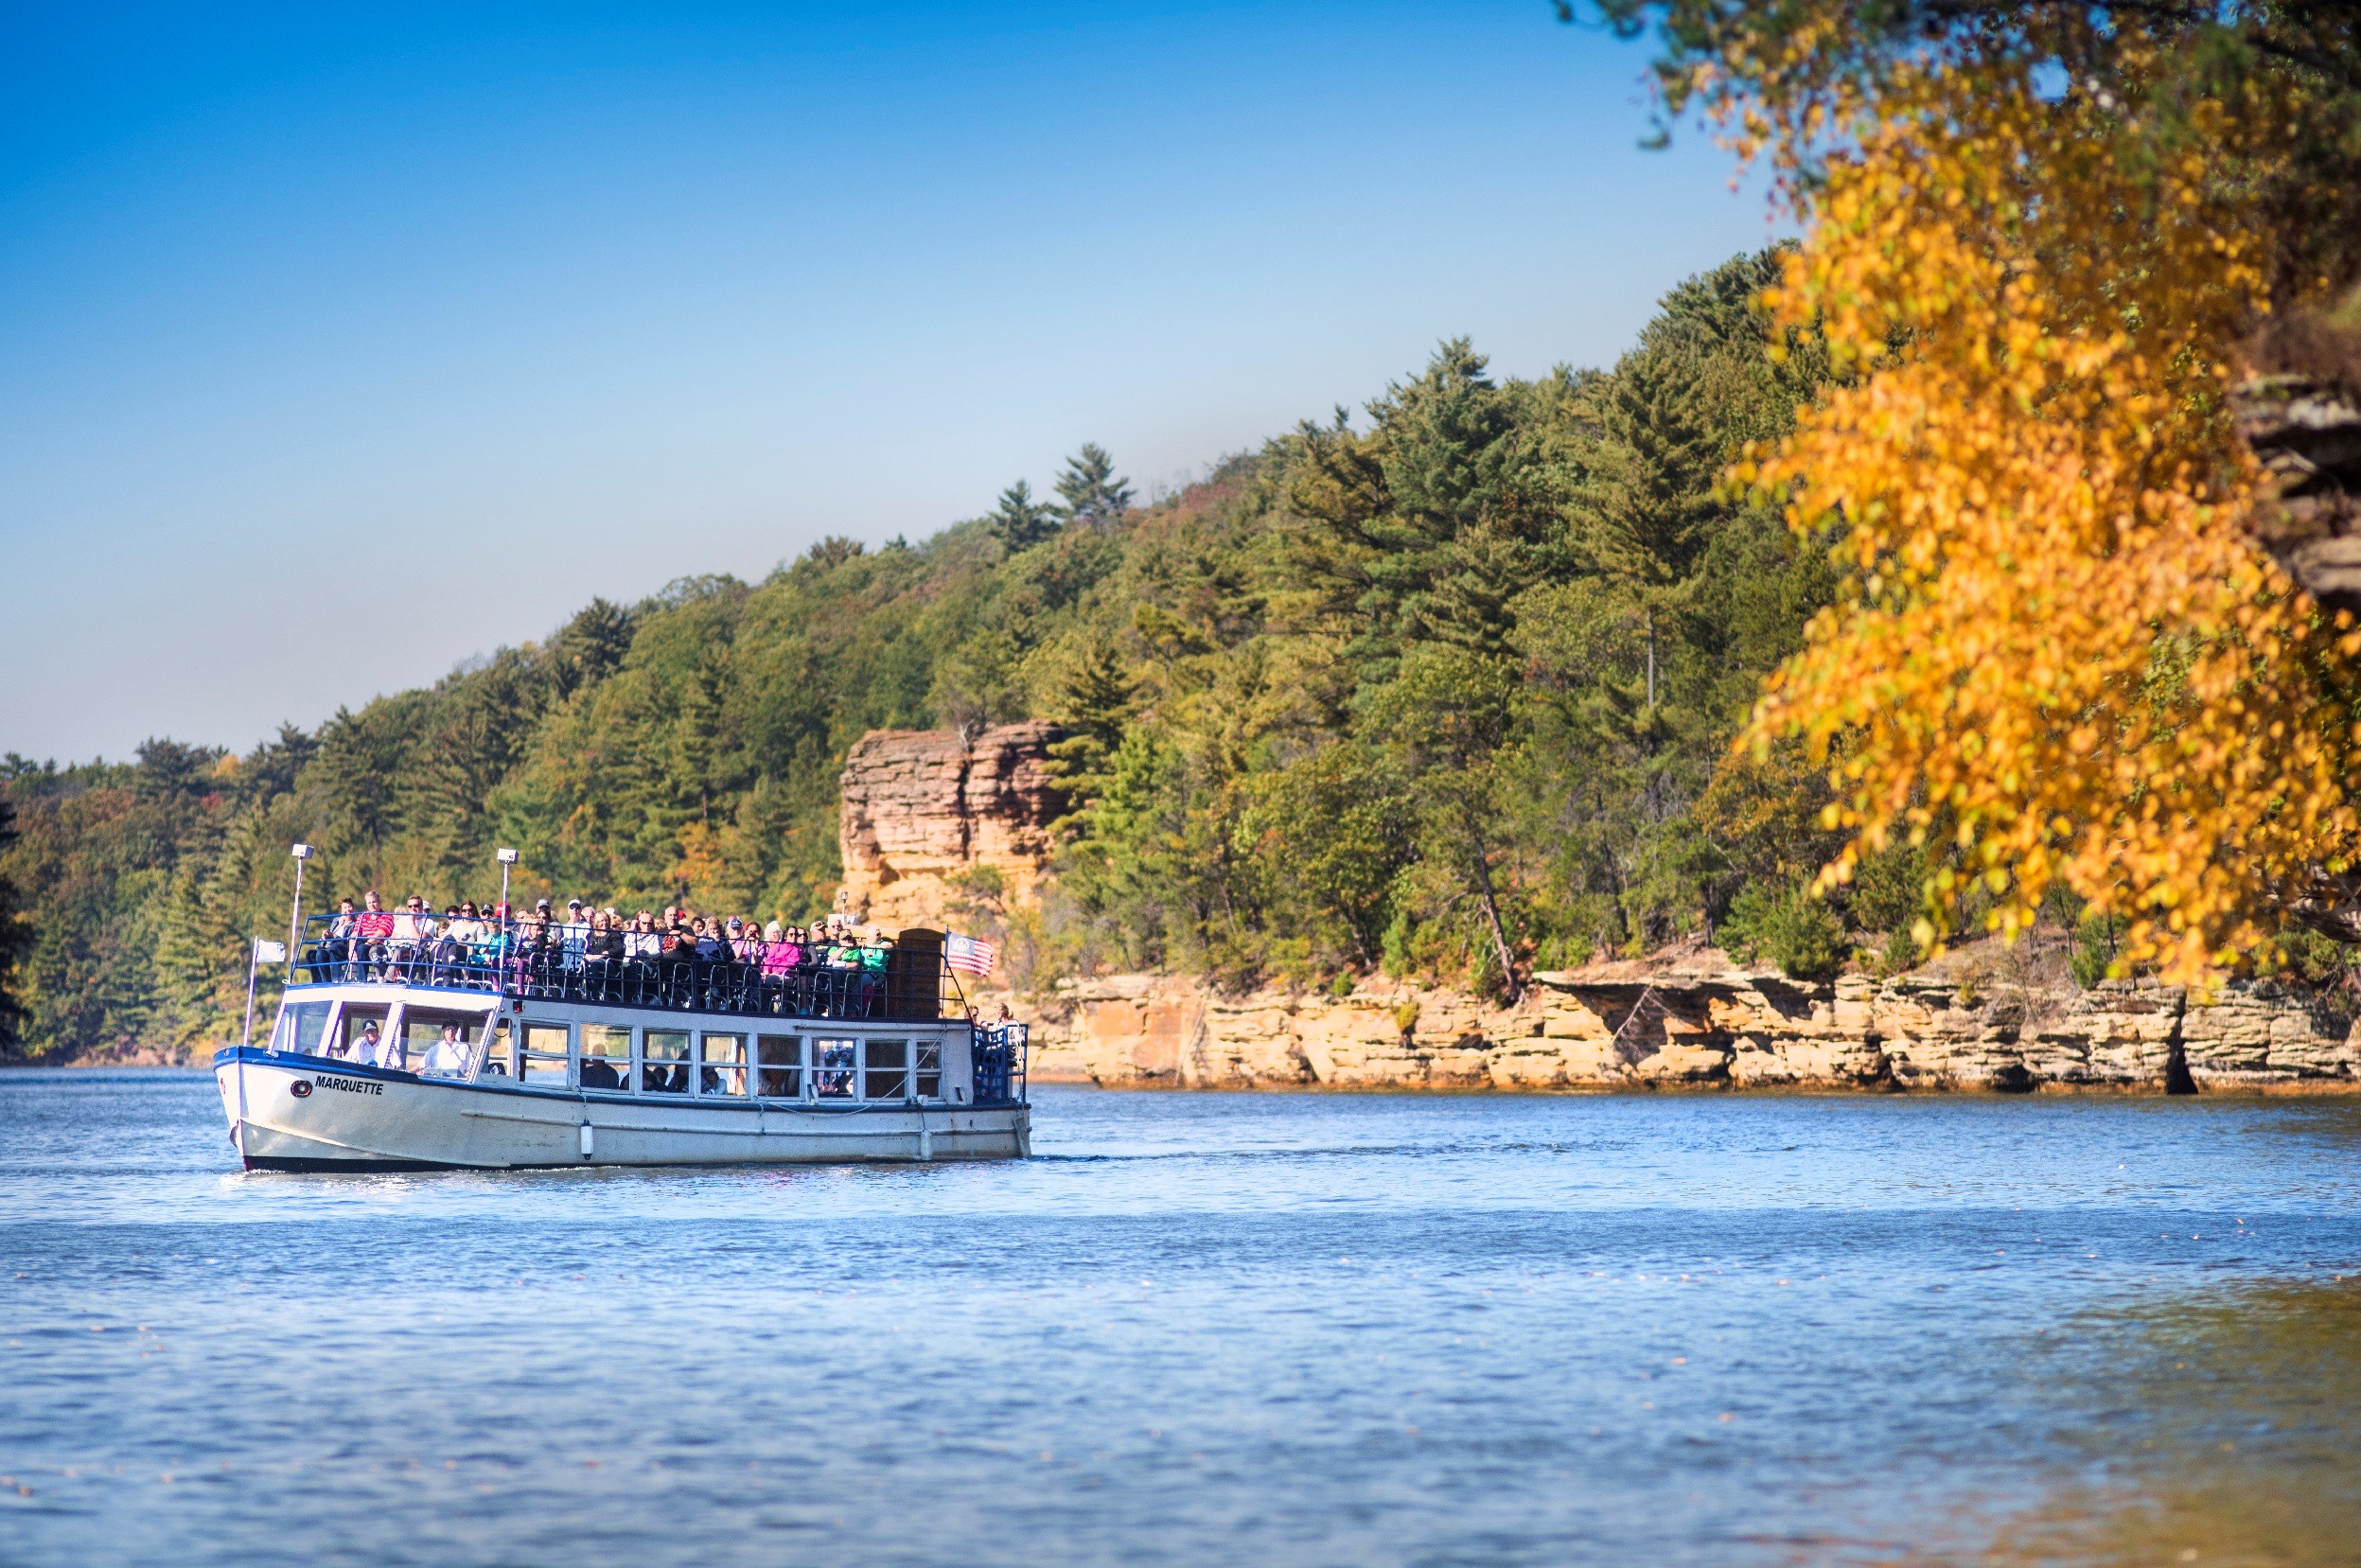 On a Dells Boat Tour is one of the best ways to take in the changing fall color.